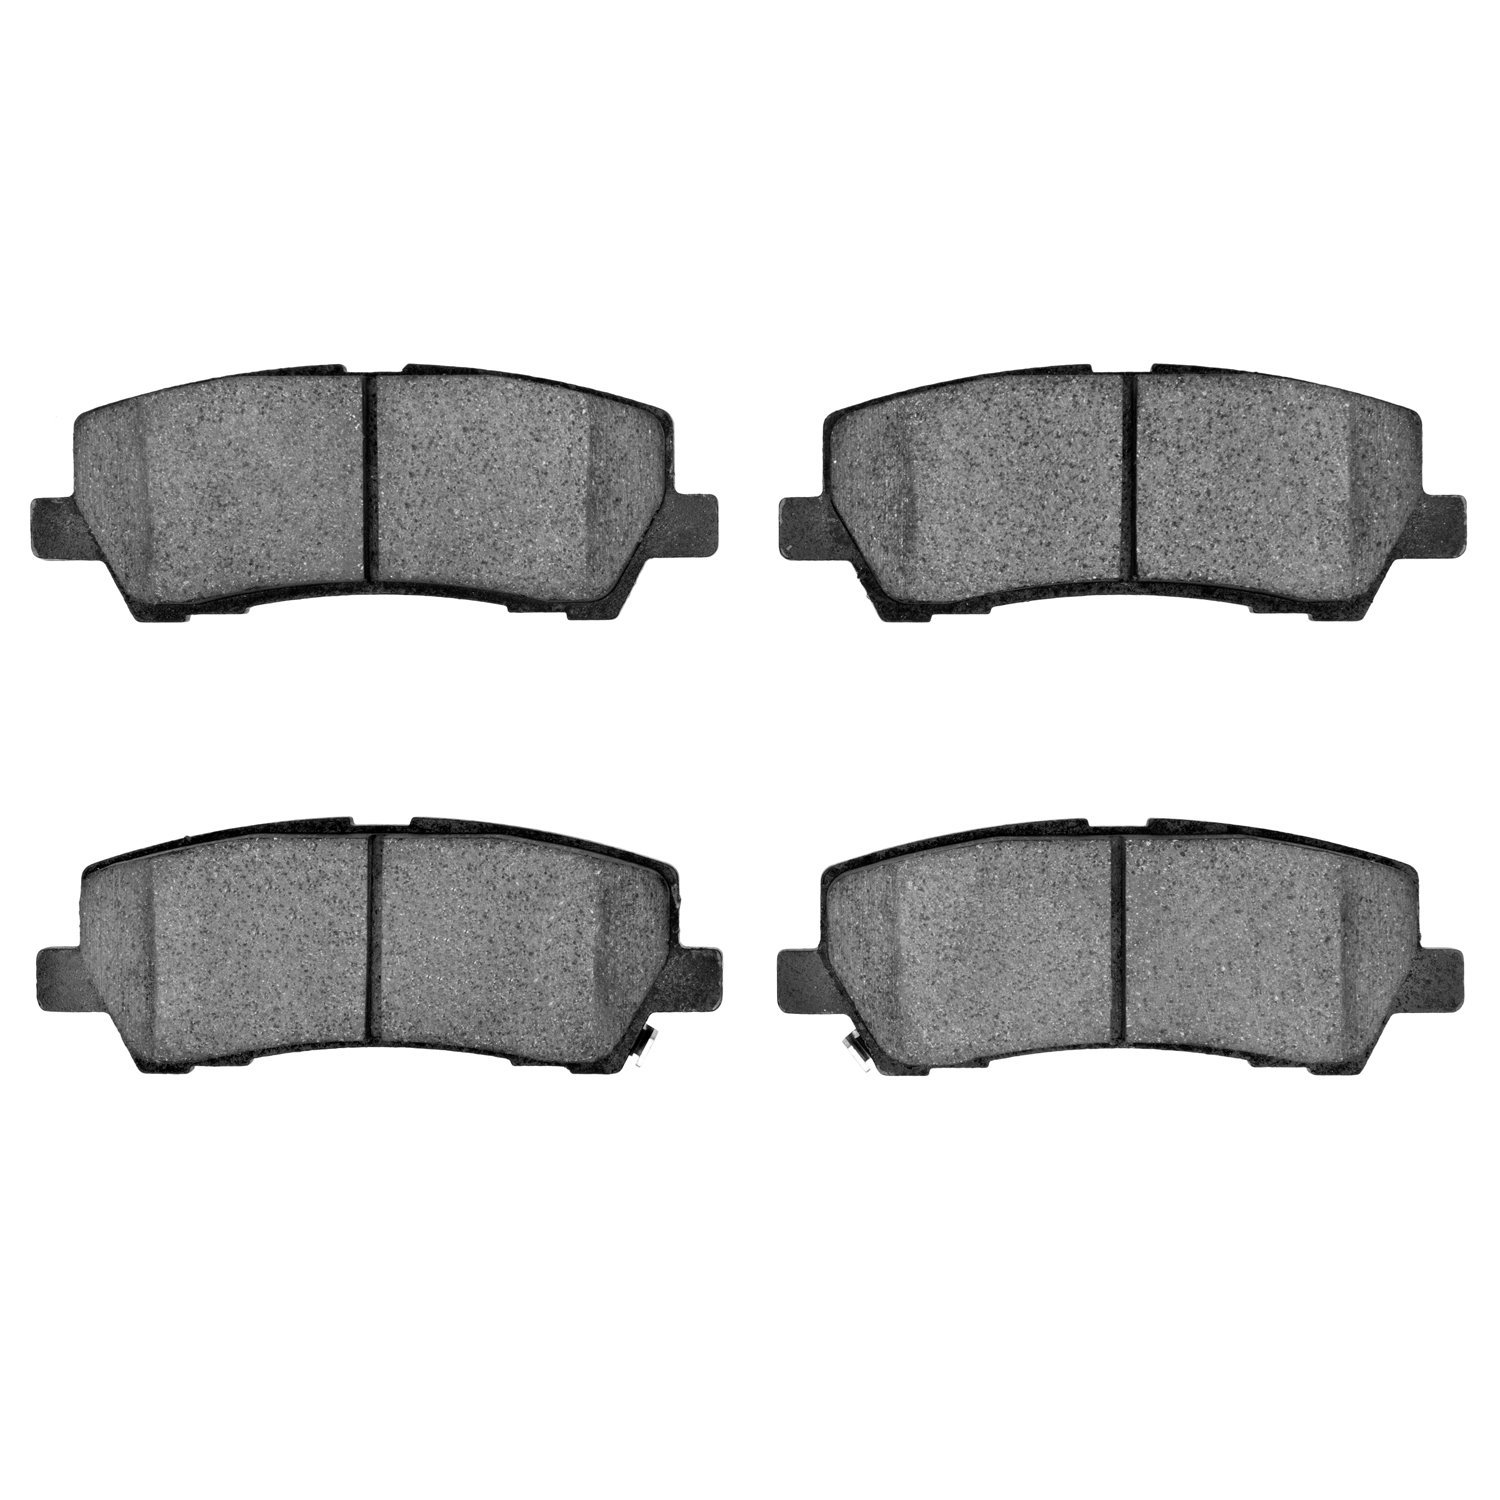 Performance Sport Brake Pads, Fits Select Ford/Lincoln/Mercury/Mazda, Position: Rear